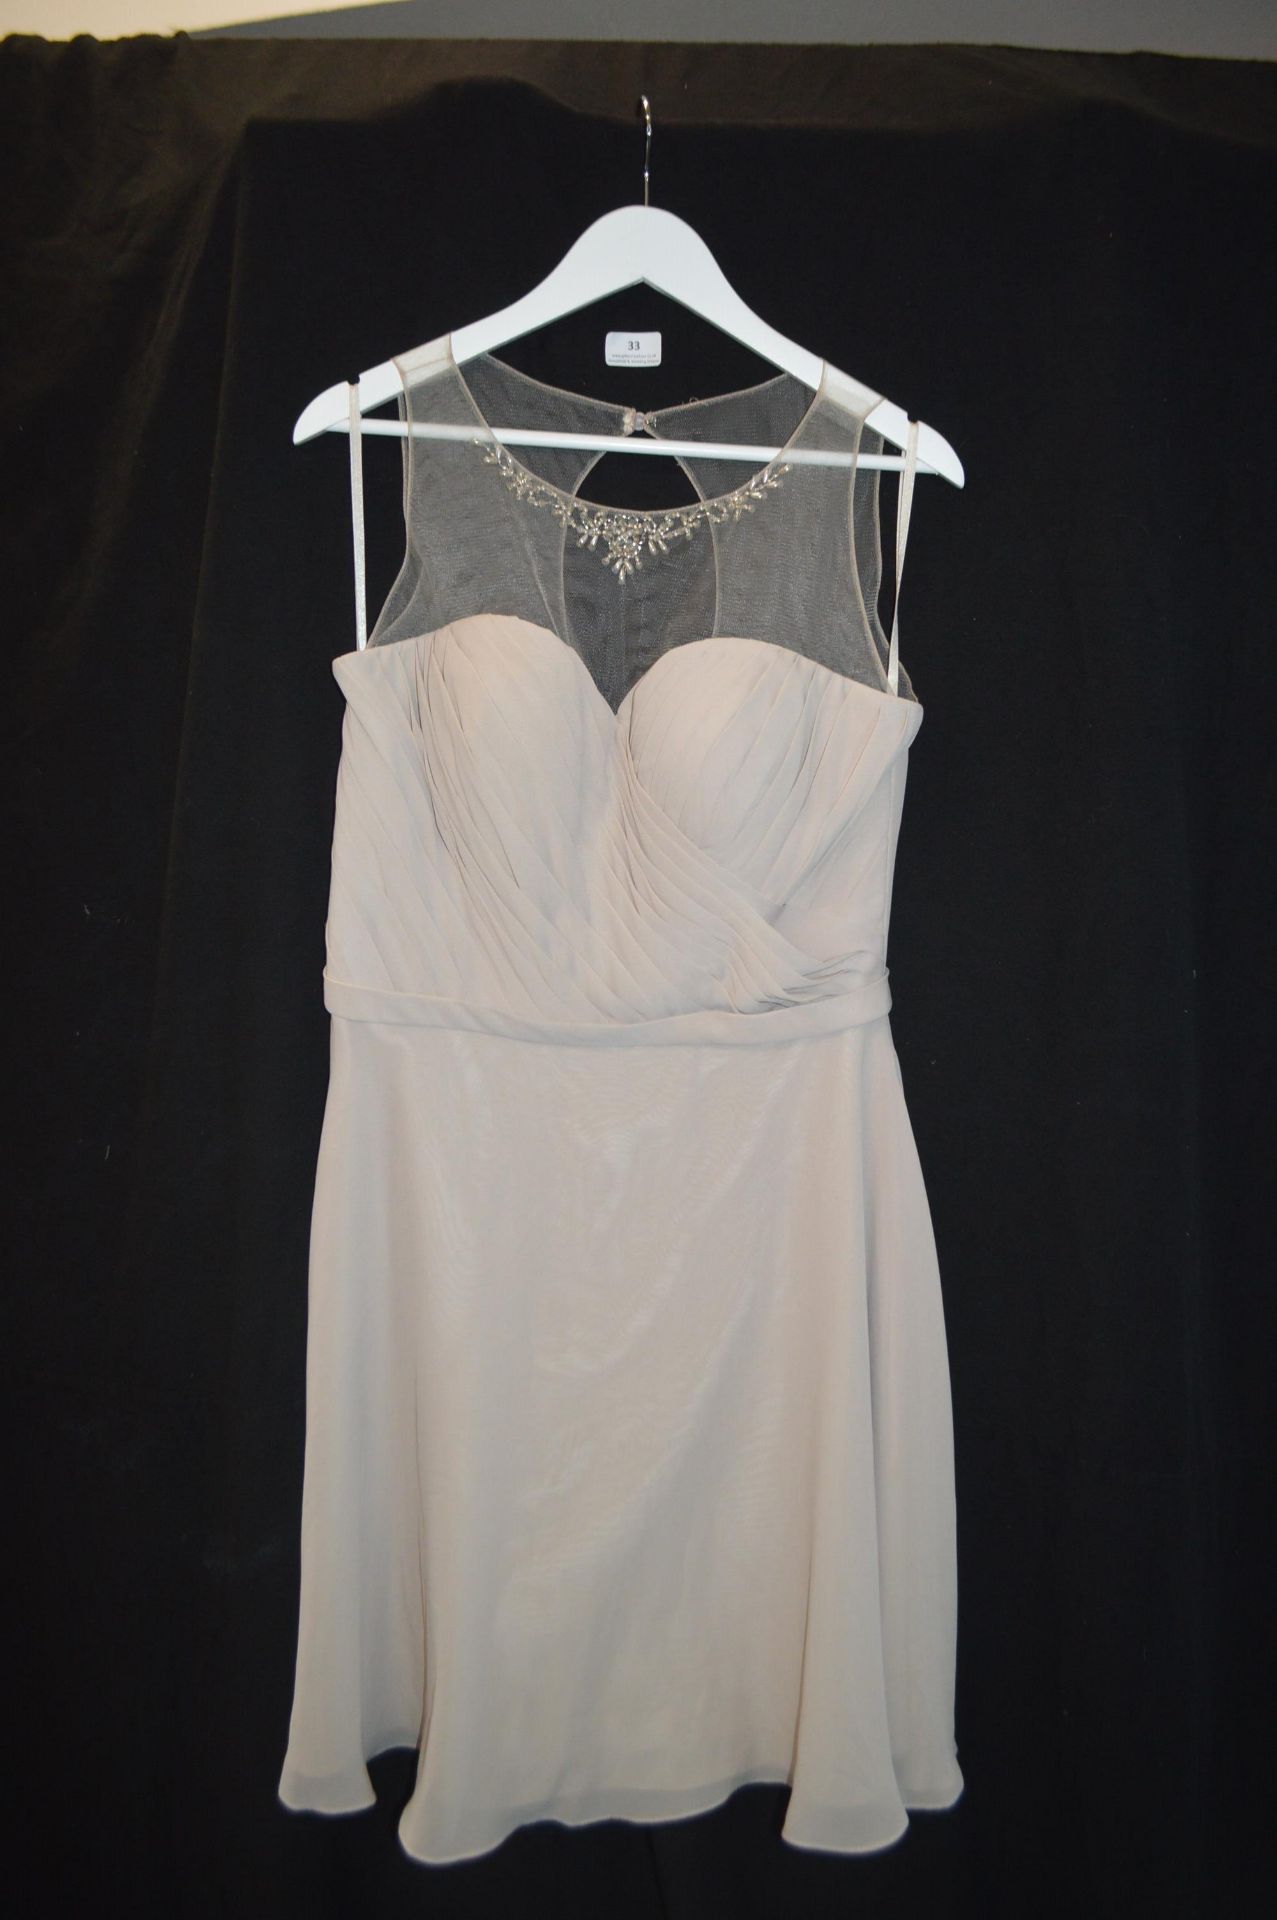 Prom Dress in Cappuccino by Kenneth Winston for Private Label Size: 14